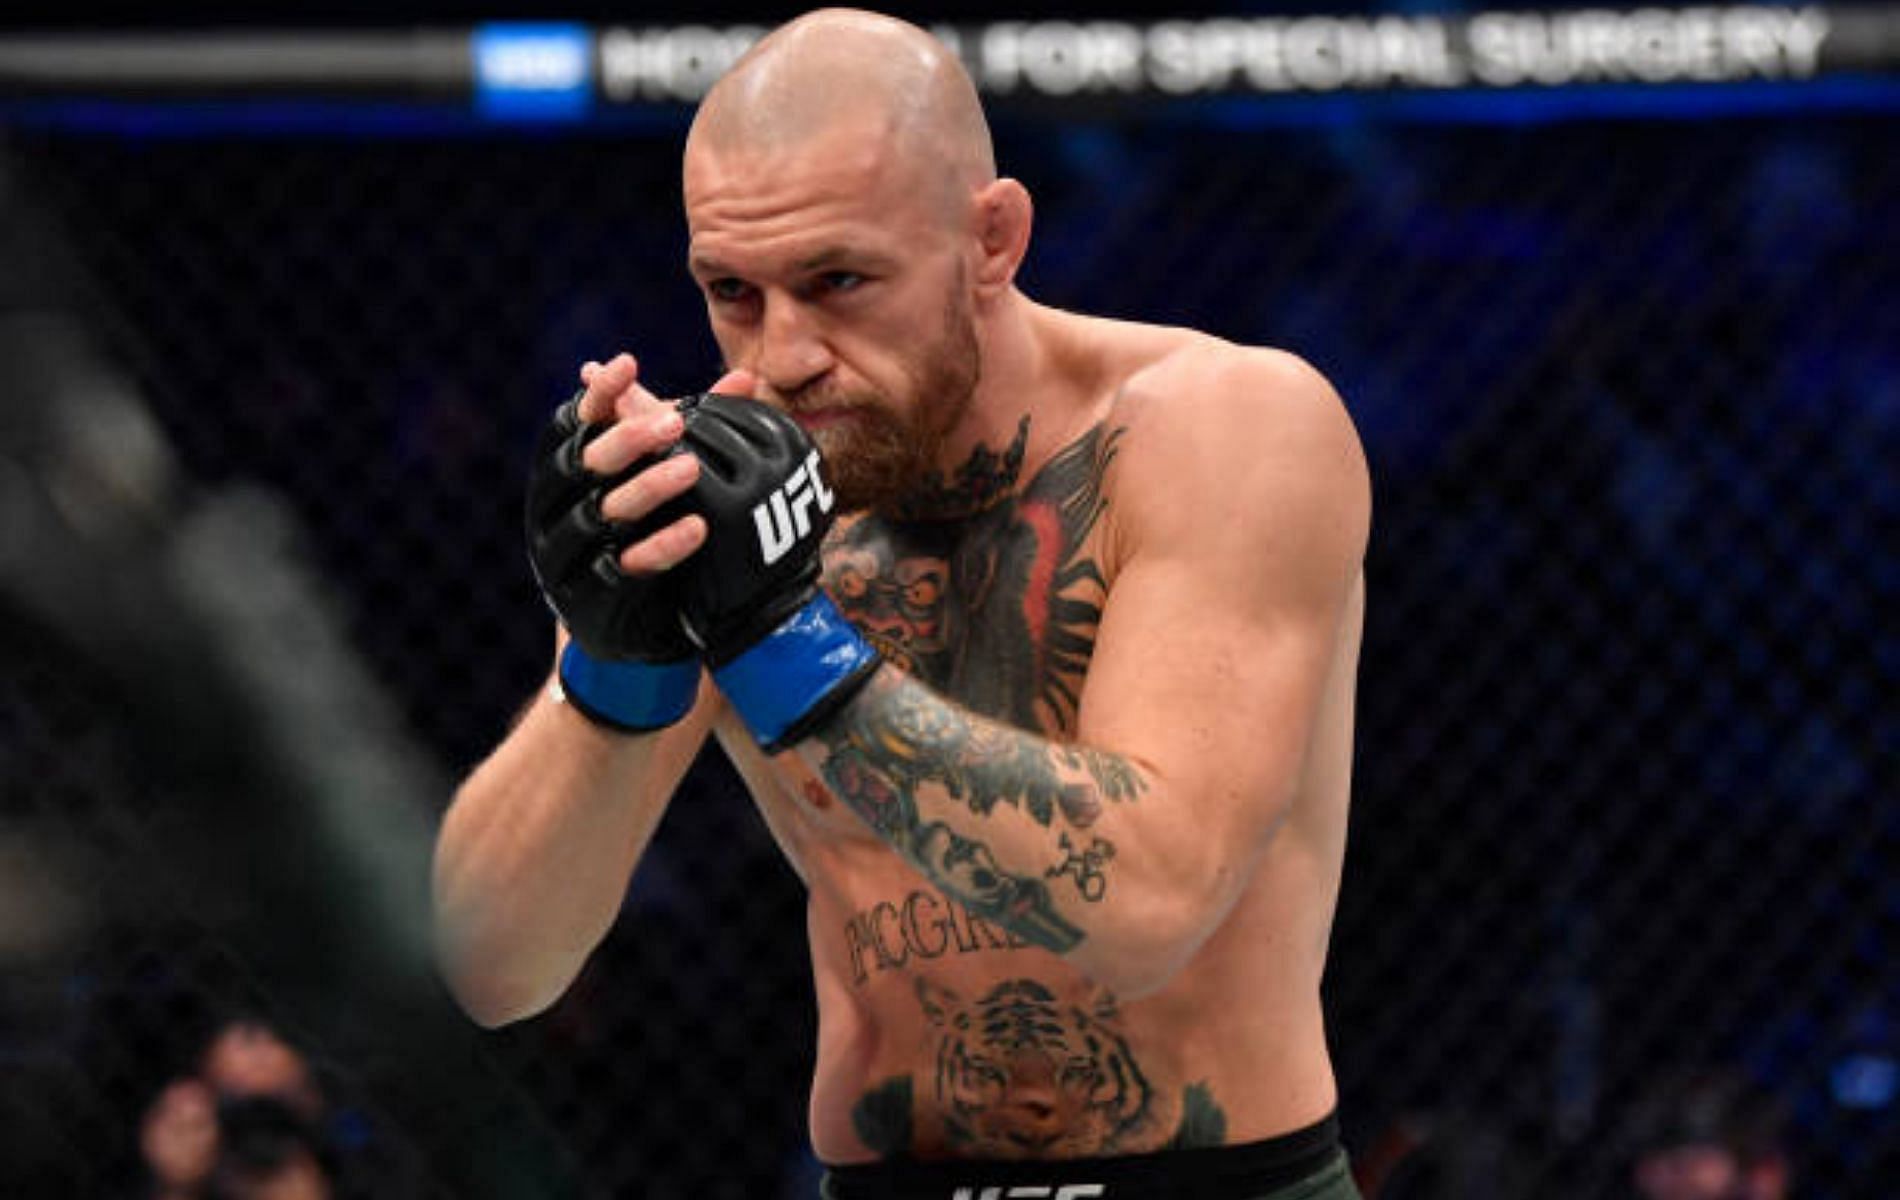 Is it time for Conor McGregor to bid farewell to the sport he helped put on the map?